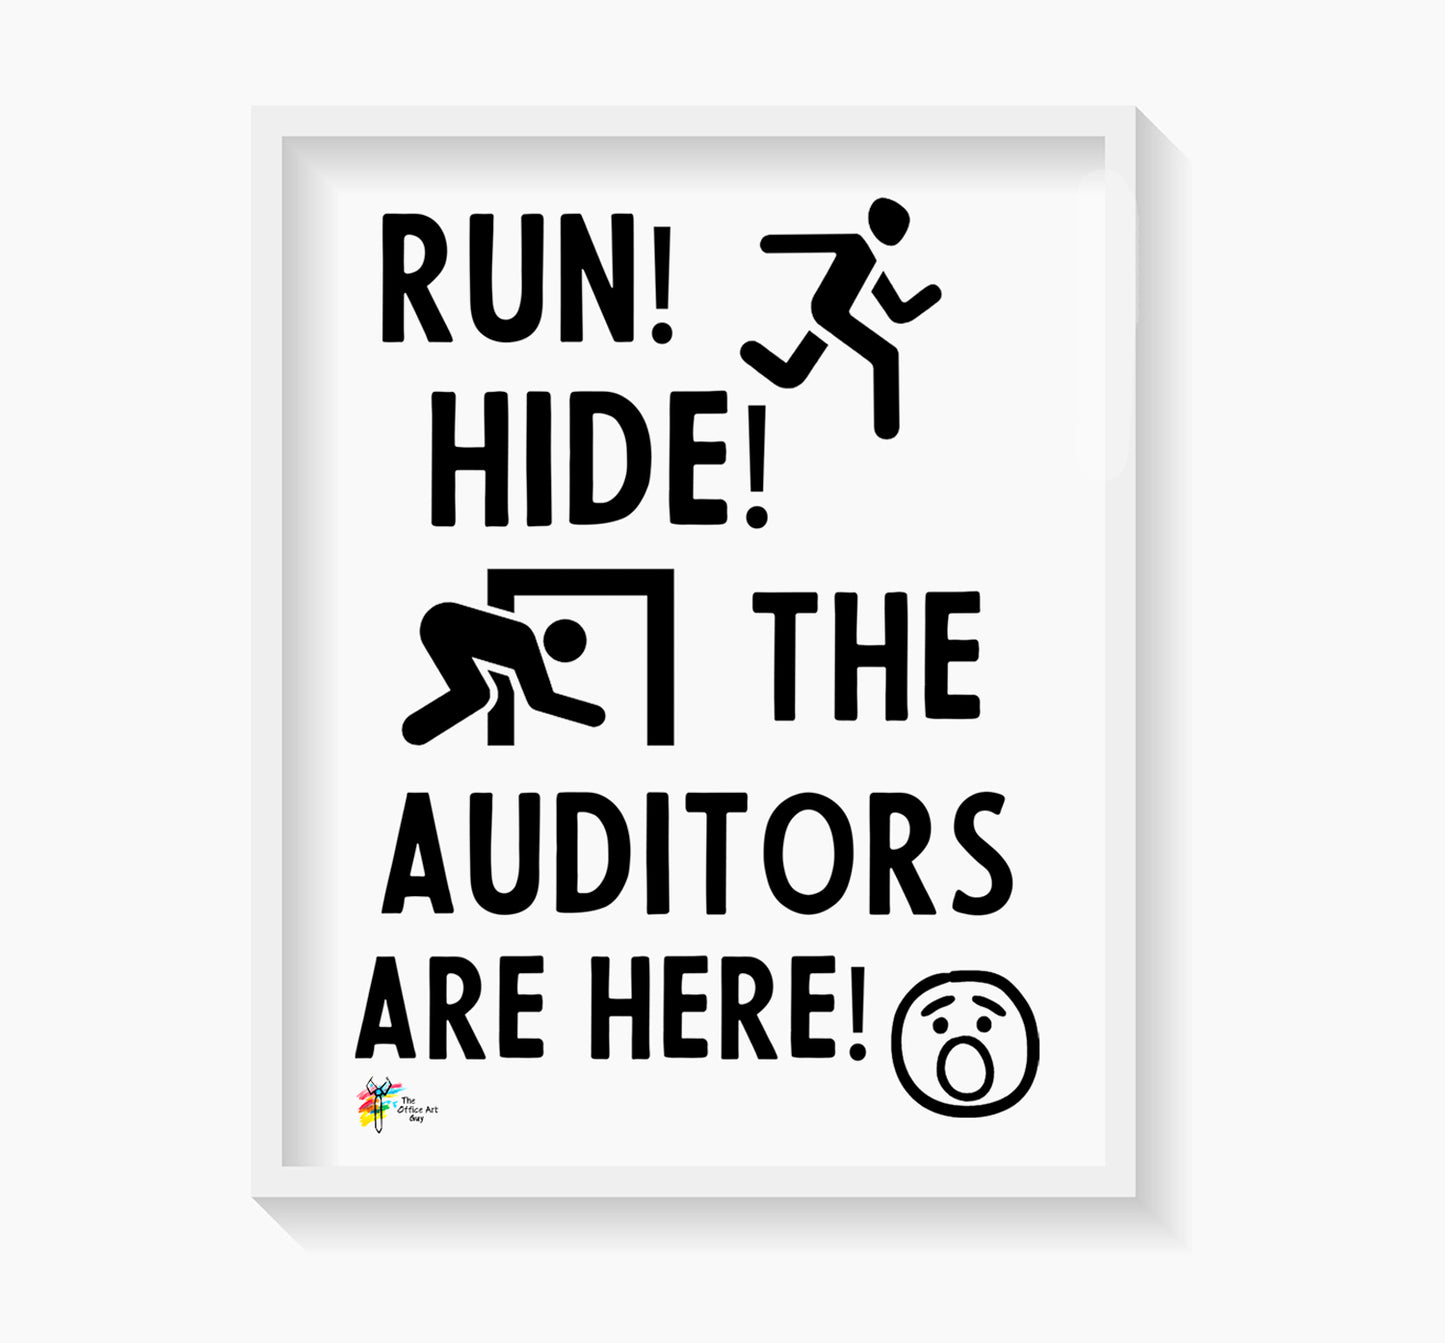 Funny Accountant Art Print for Auditors by The Office Art Guy